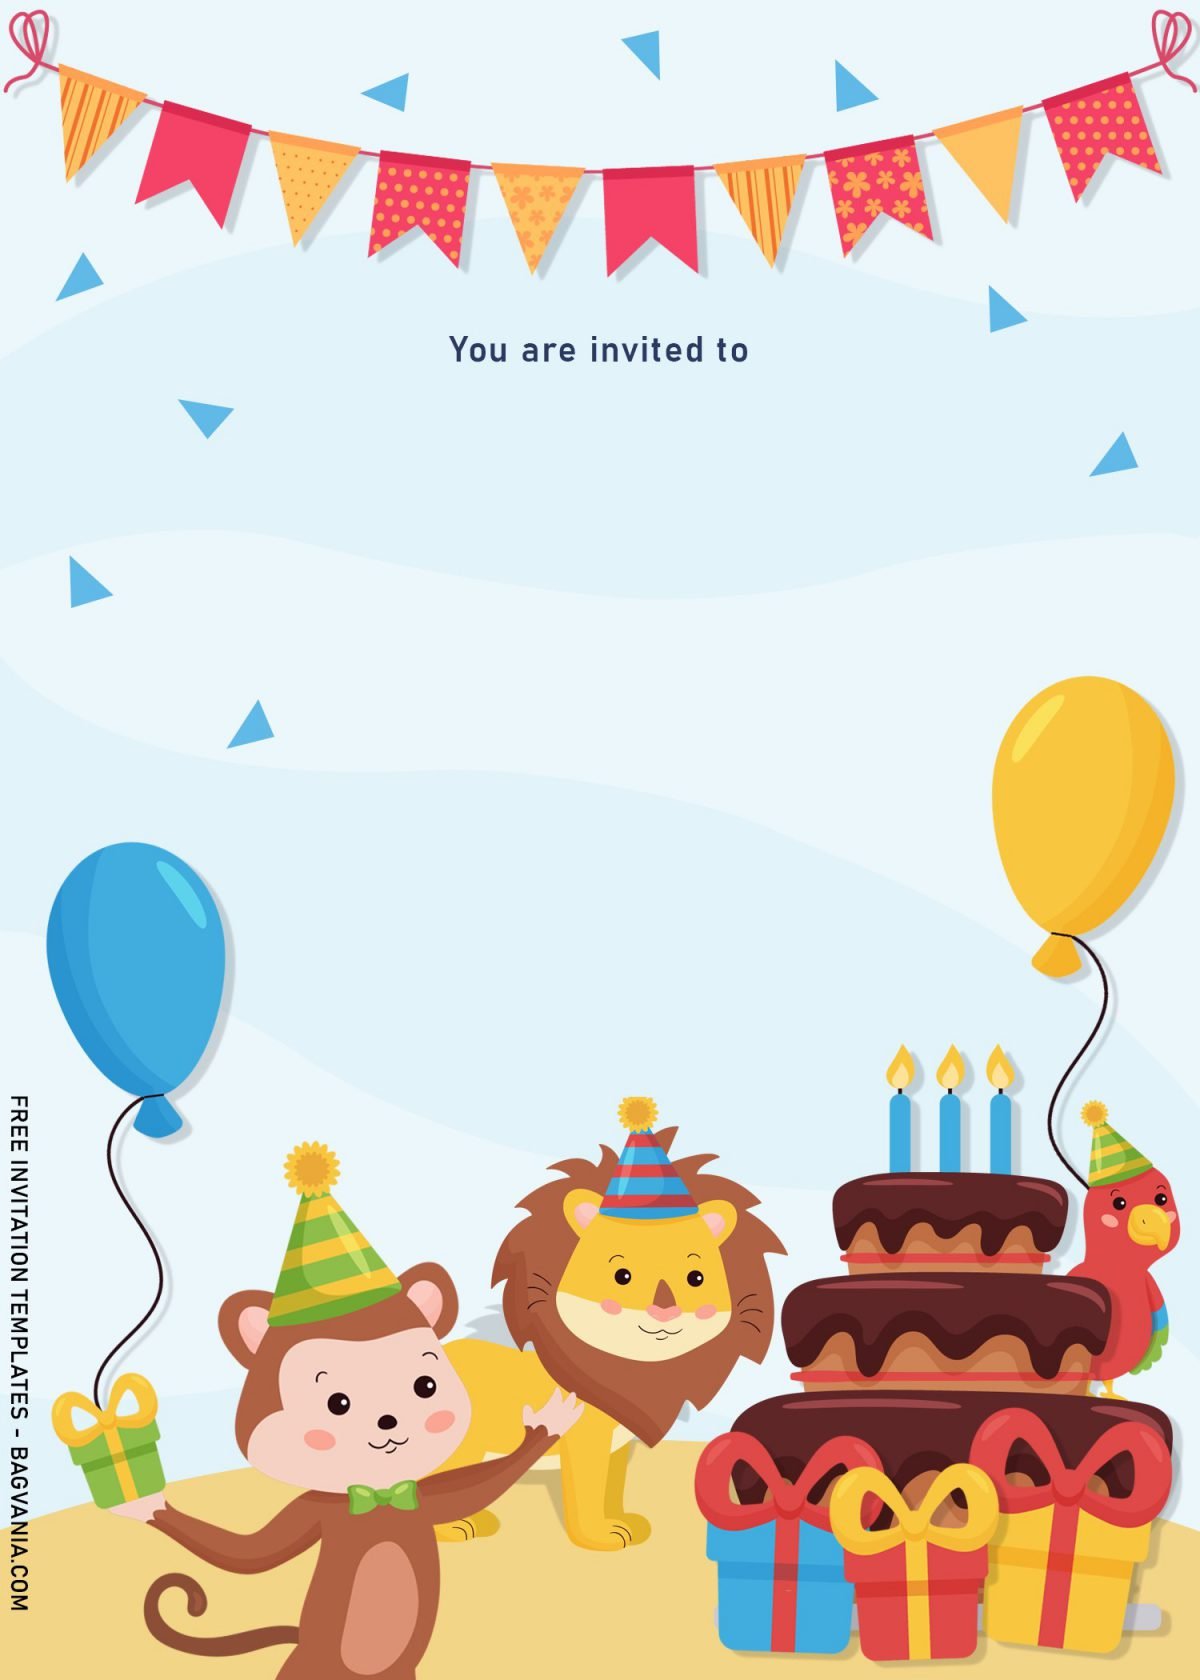 8+ Cute Woodland Animals Birthday Invitation Templates and has Blue and Yellow balloons